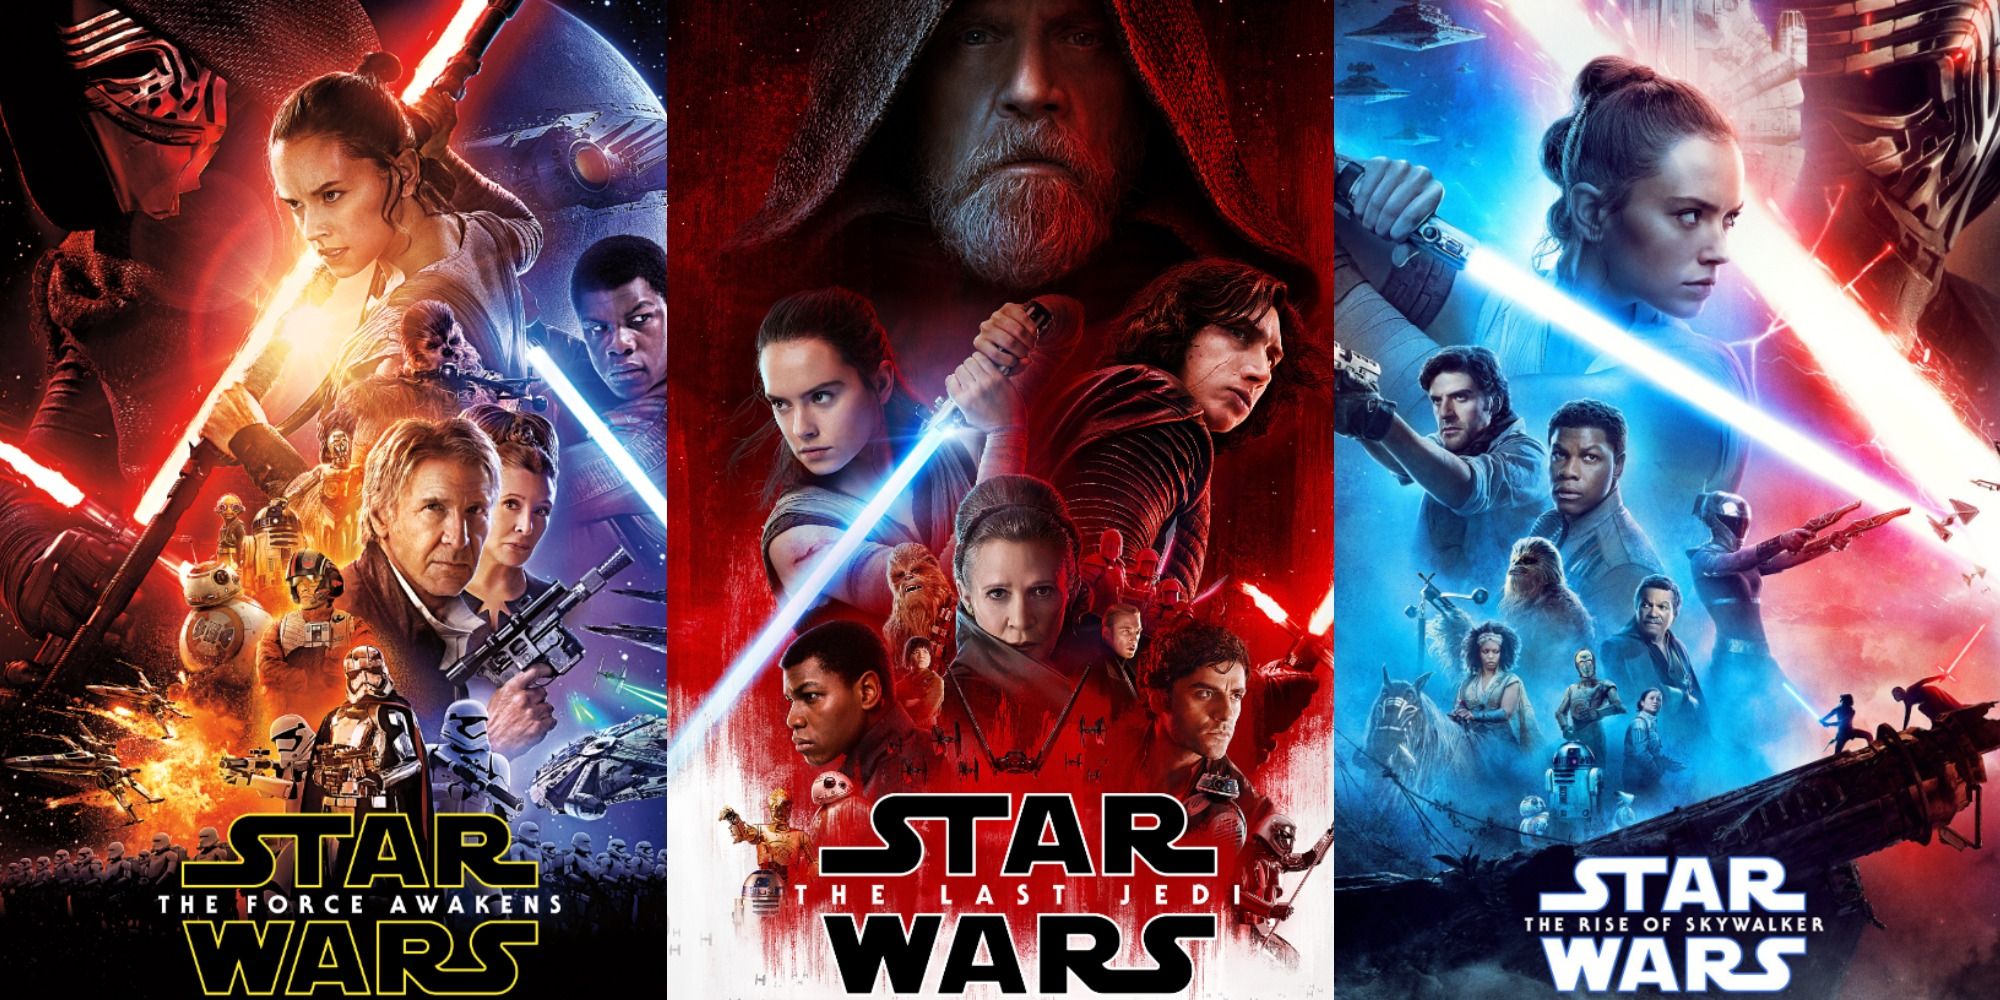 combined posters of Star Wars The Force Awakens, The Last Jedi, The Rise of Skywalker